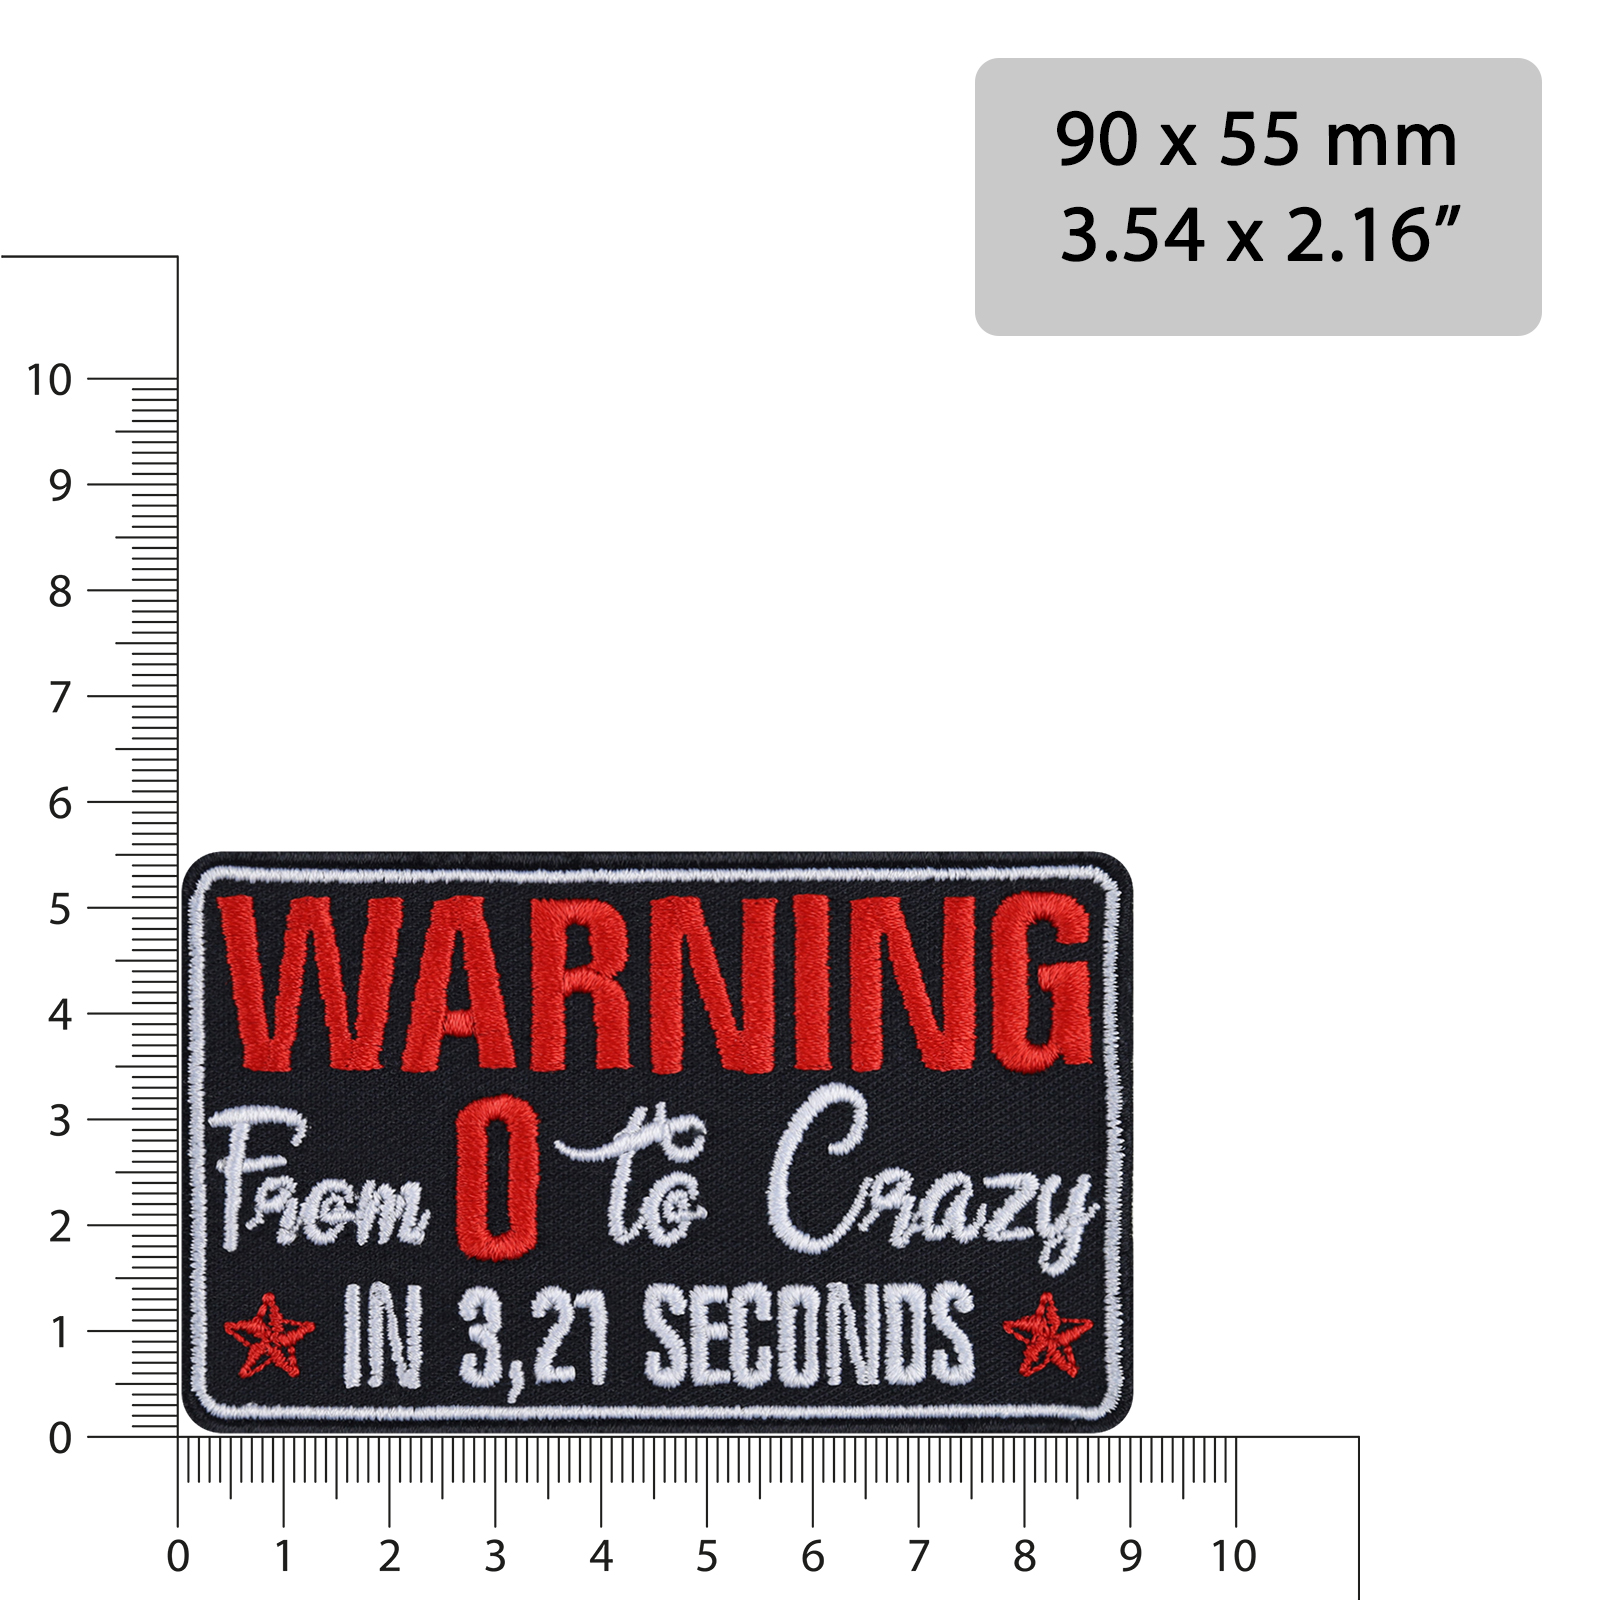 Warning - From 0 to crazy in 3,21 seconds - Patch